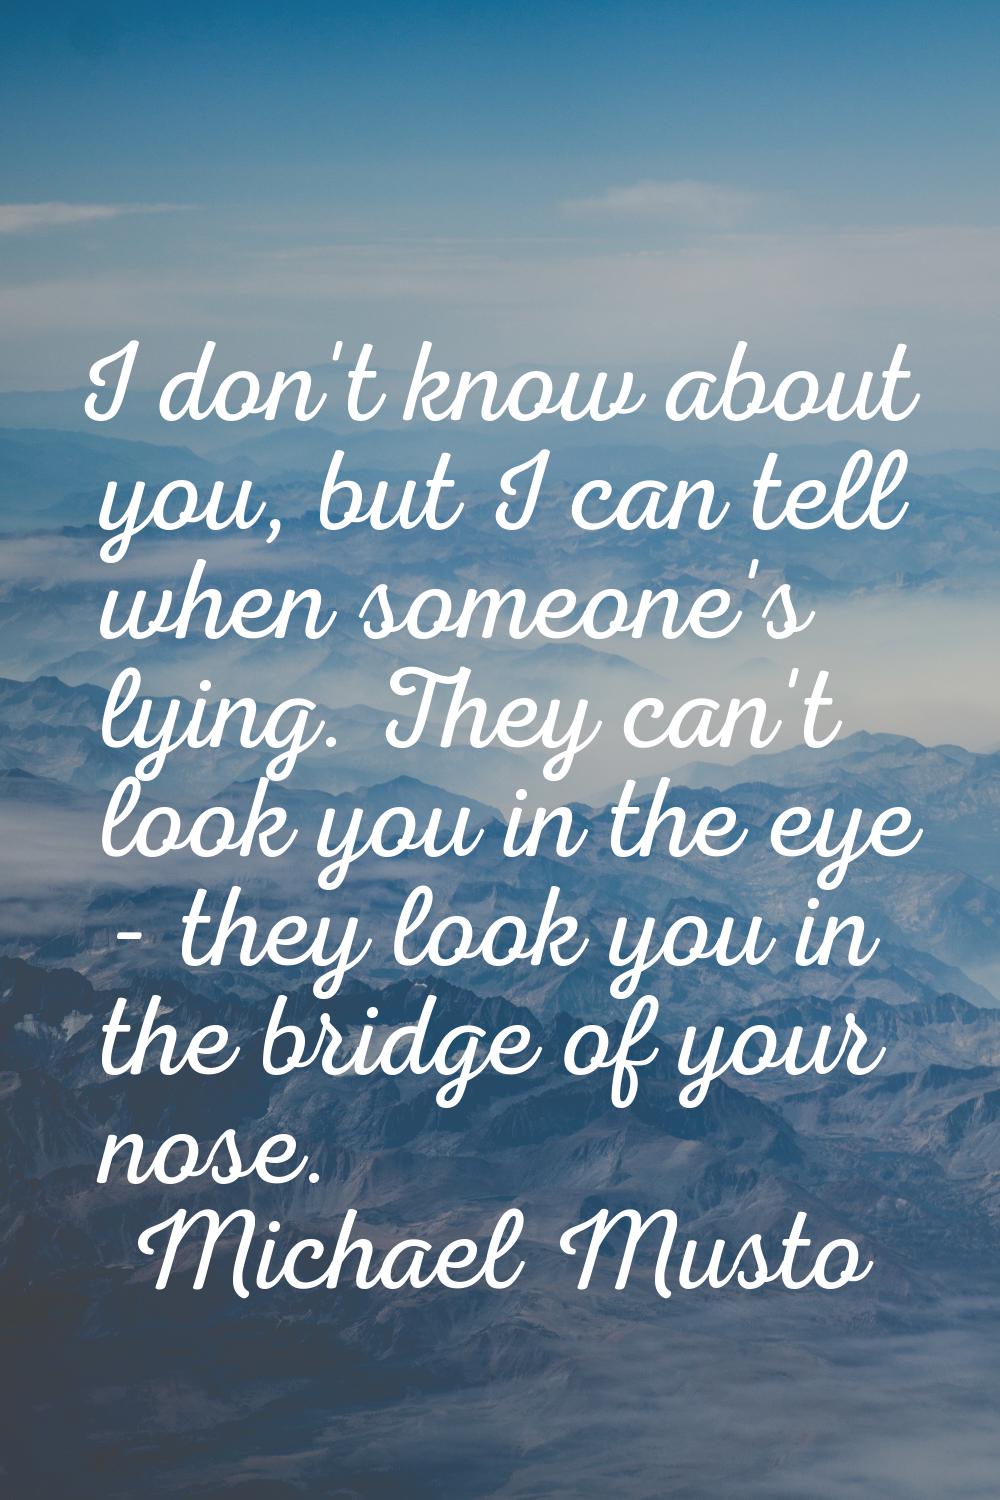 I don't know about you, but I can tell when someone's lying. They can't look you in the eye - they 